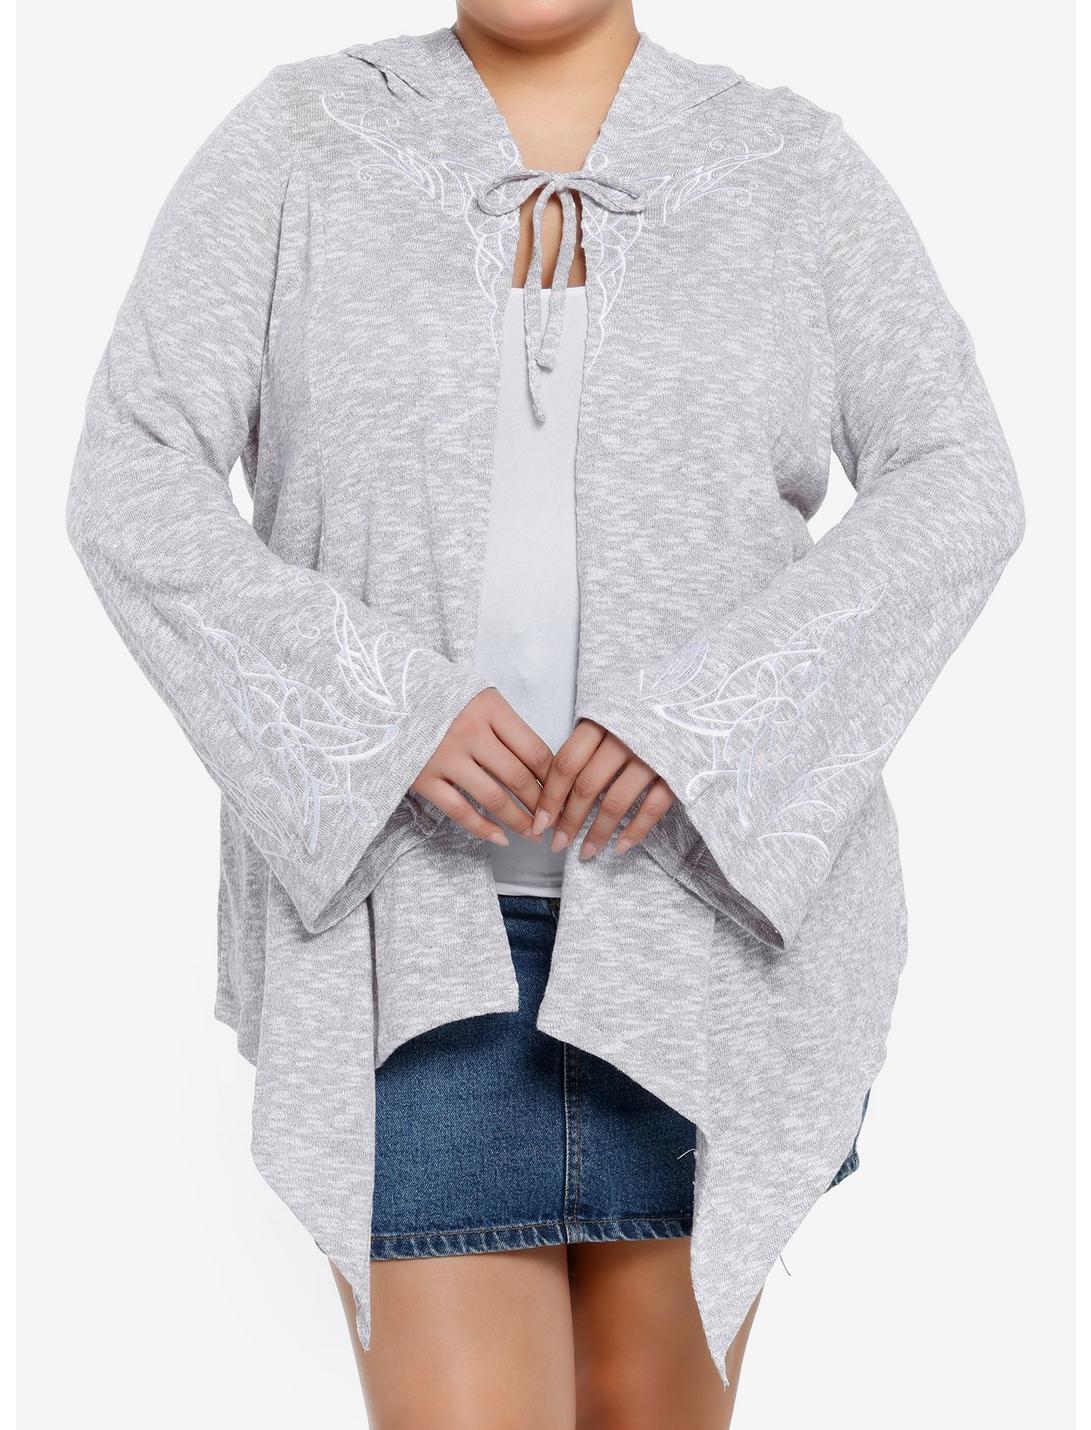 The Lord Of The Rings Arwen Evenstar Hanky Hem Cardigan Plus Size, DUSTY LILAC GREY, hi-res